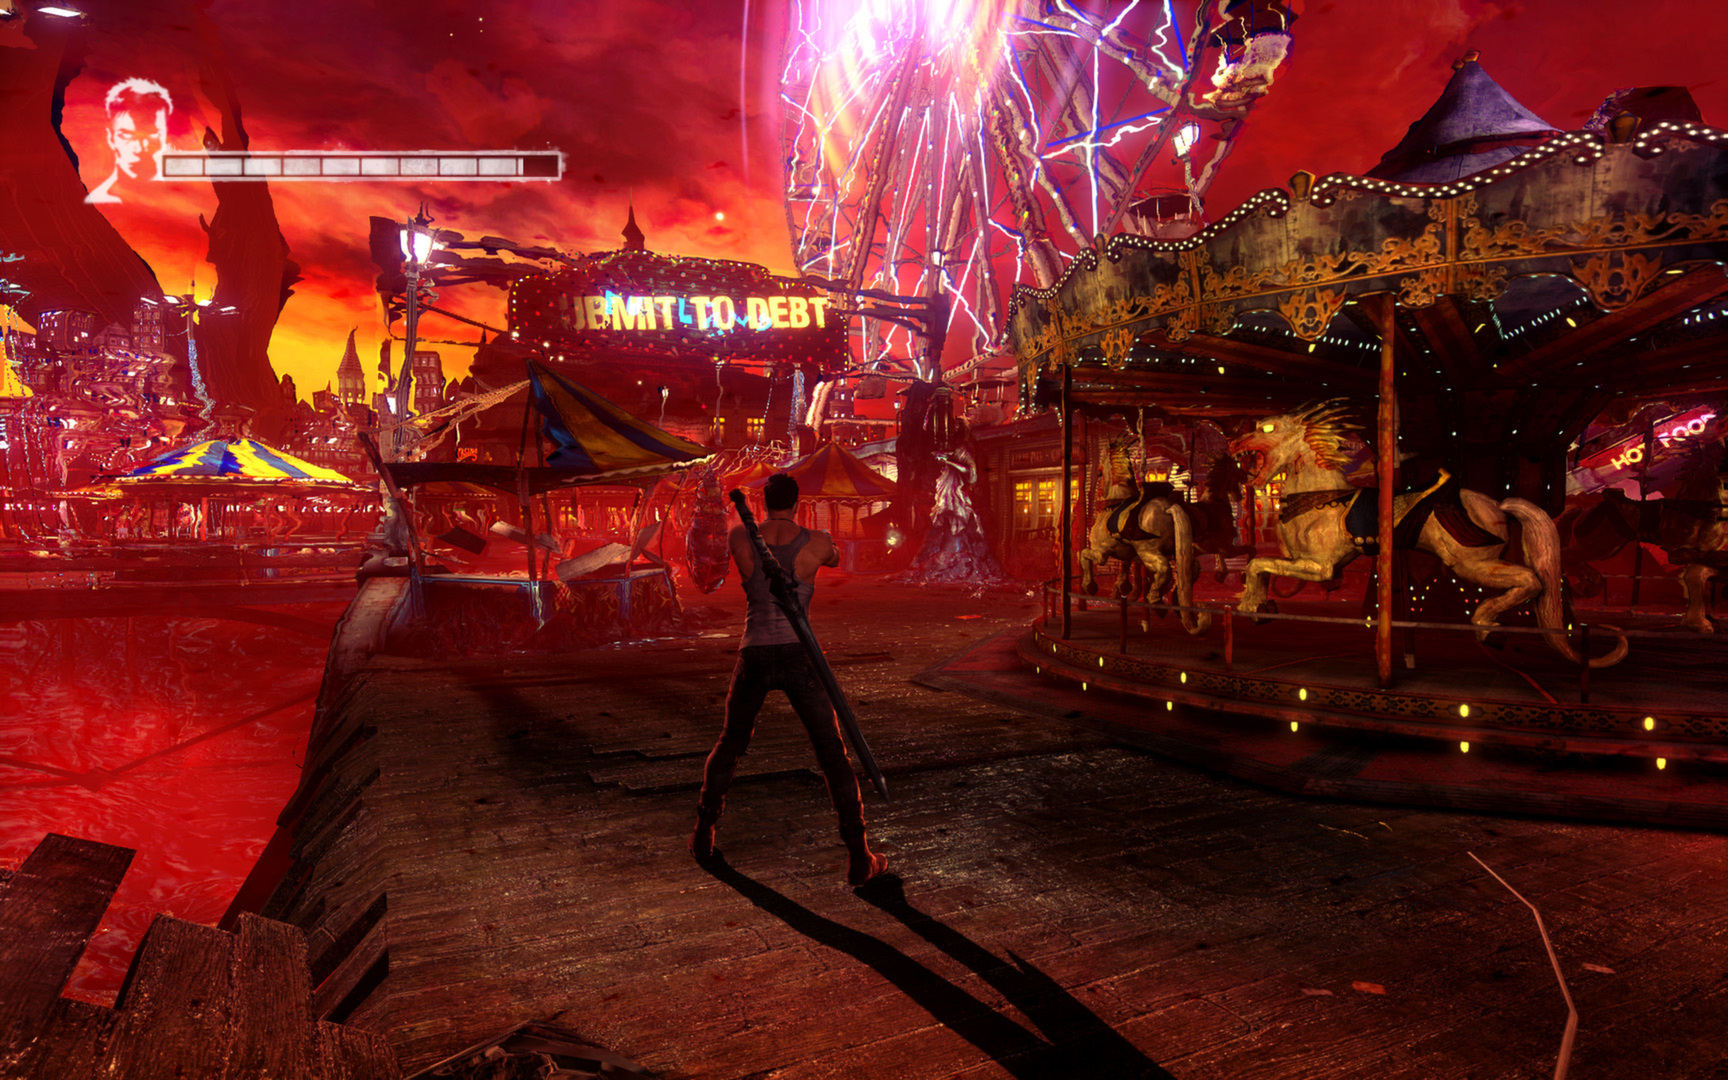 Save 75% on DmC: Devil May Cry on Steam